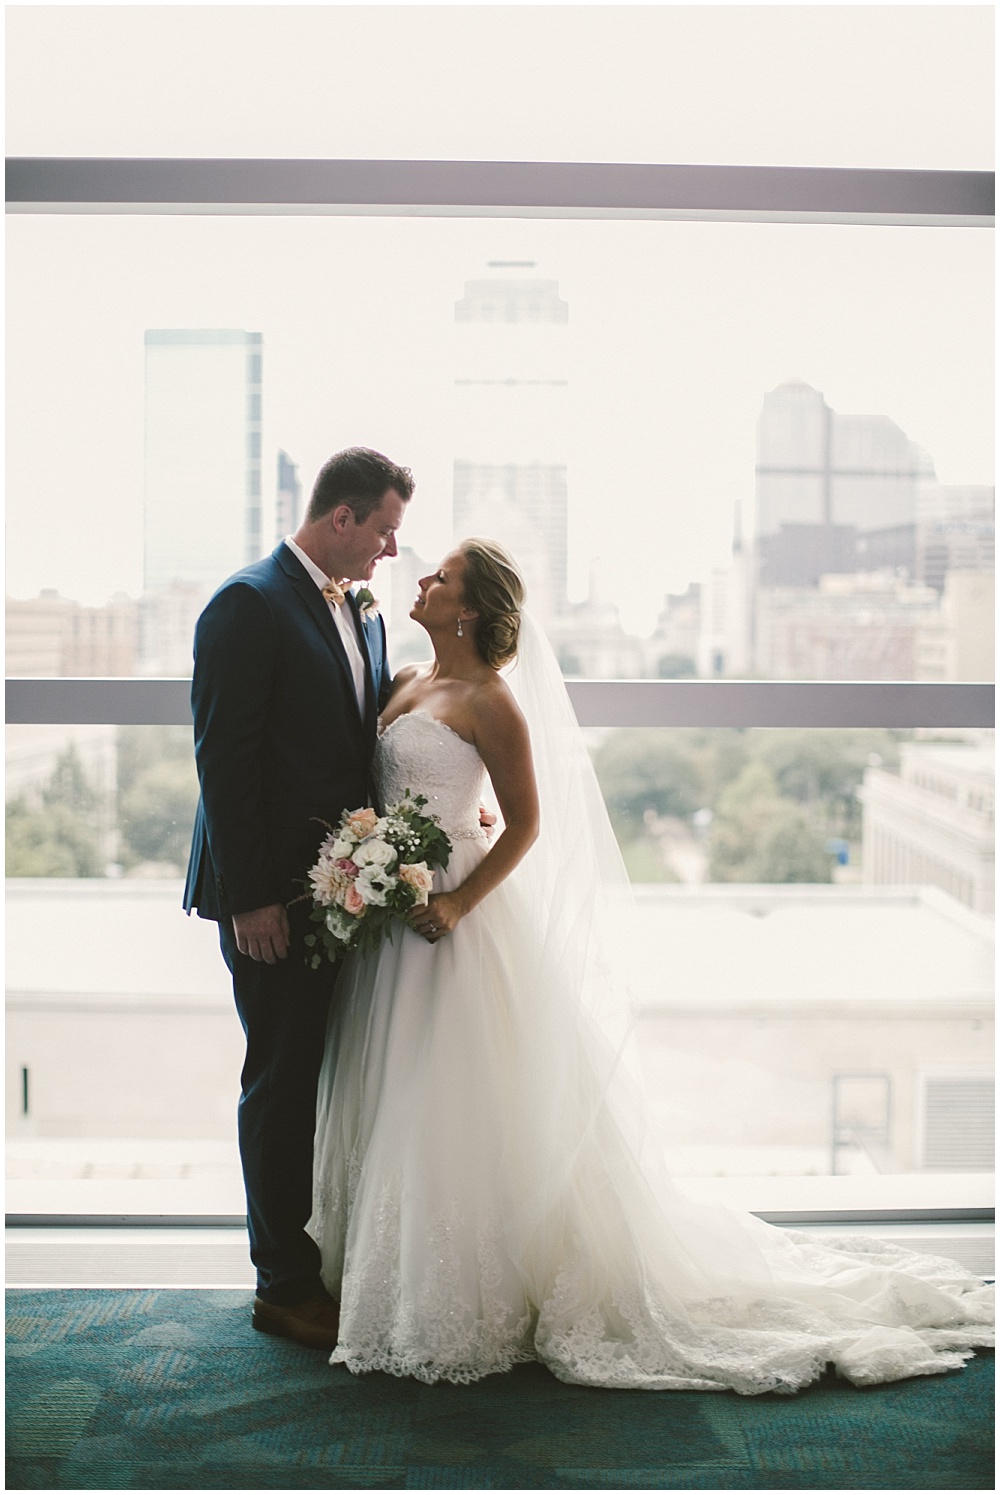 Bride and Groom library wedding portraits | Indianapolis Central Library Wedding by Jennifer Van Elk Photography & Jessica Dum Wedding Coordination